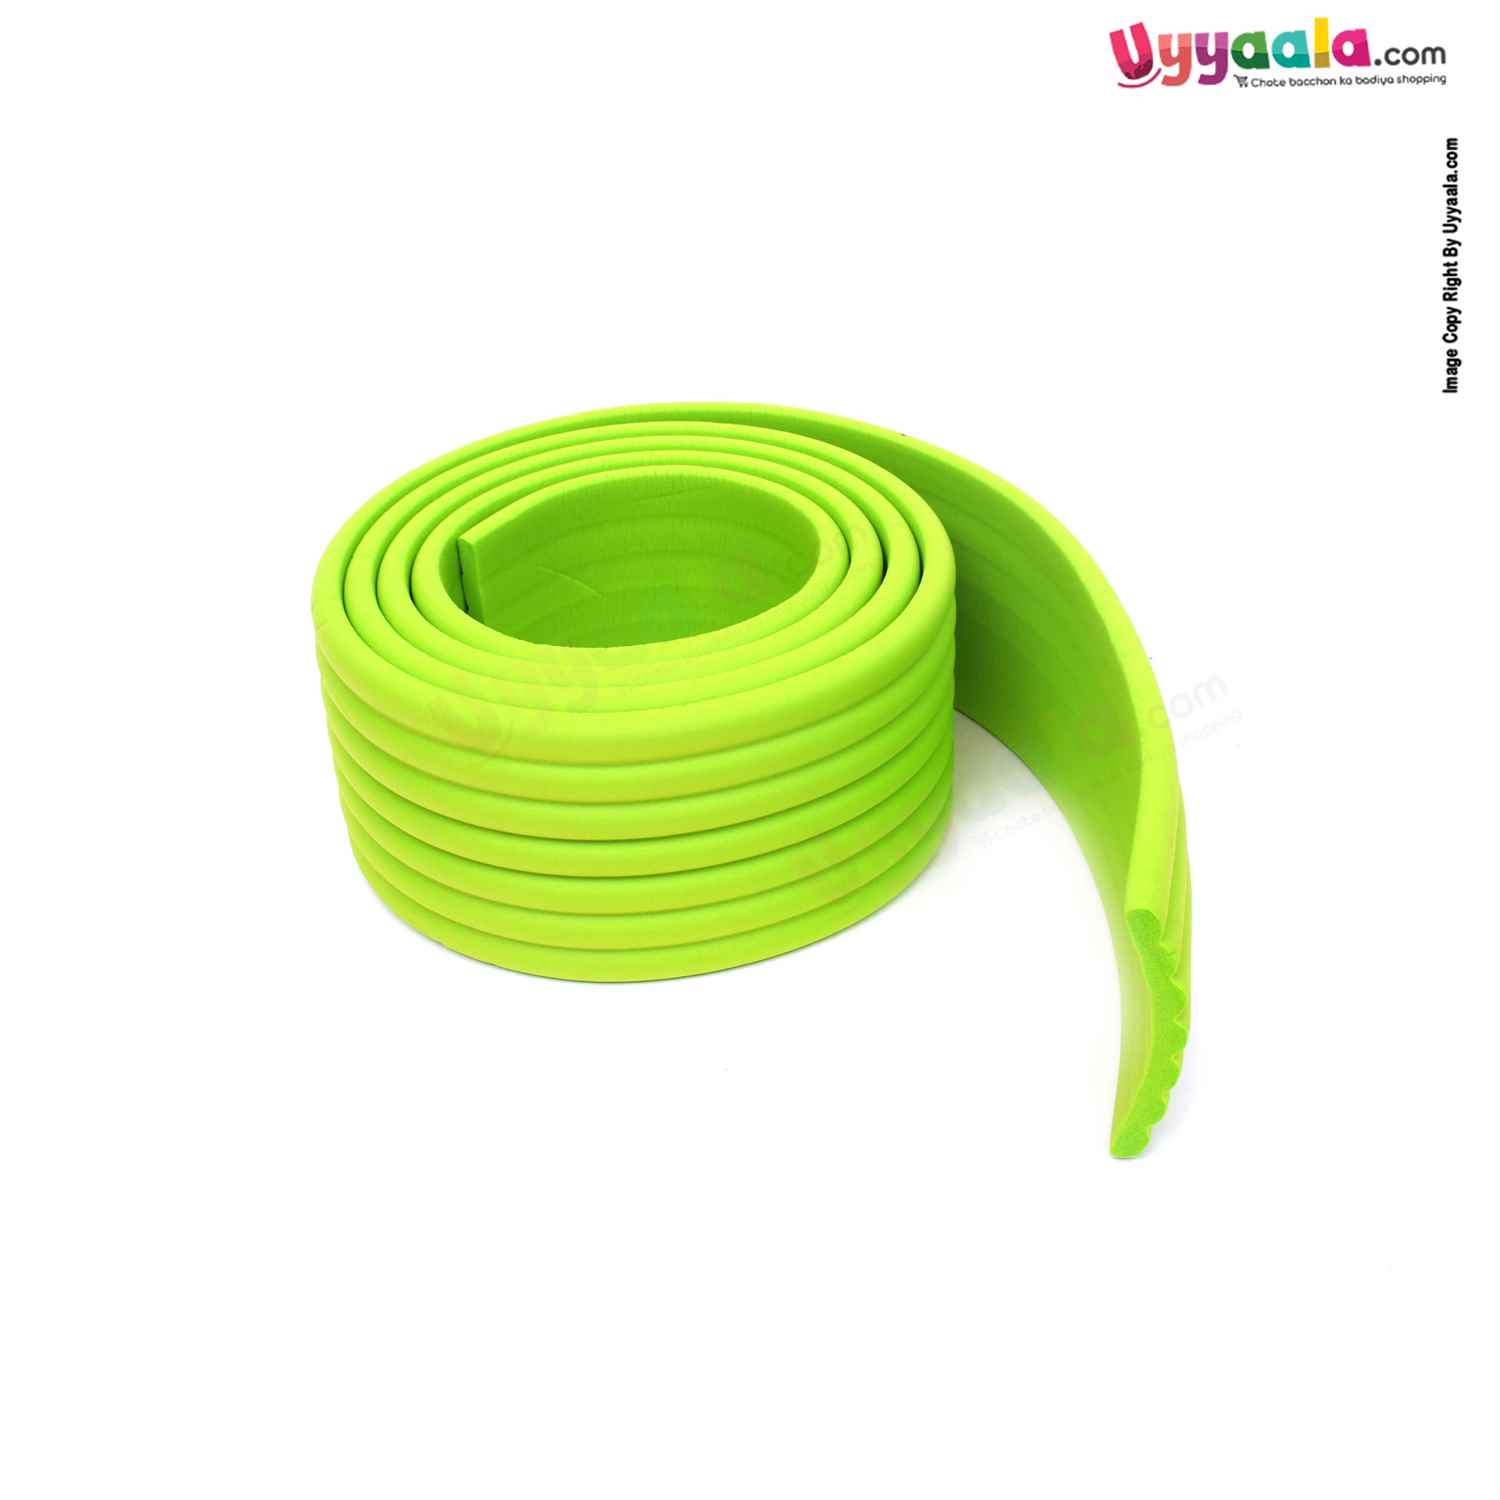 WEIKANG Safety Edge Guard for Babies 2 Meters 0+m Age, Green